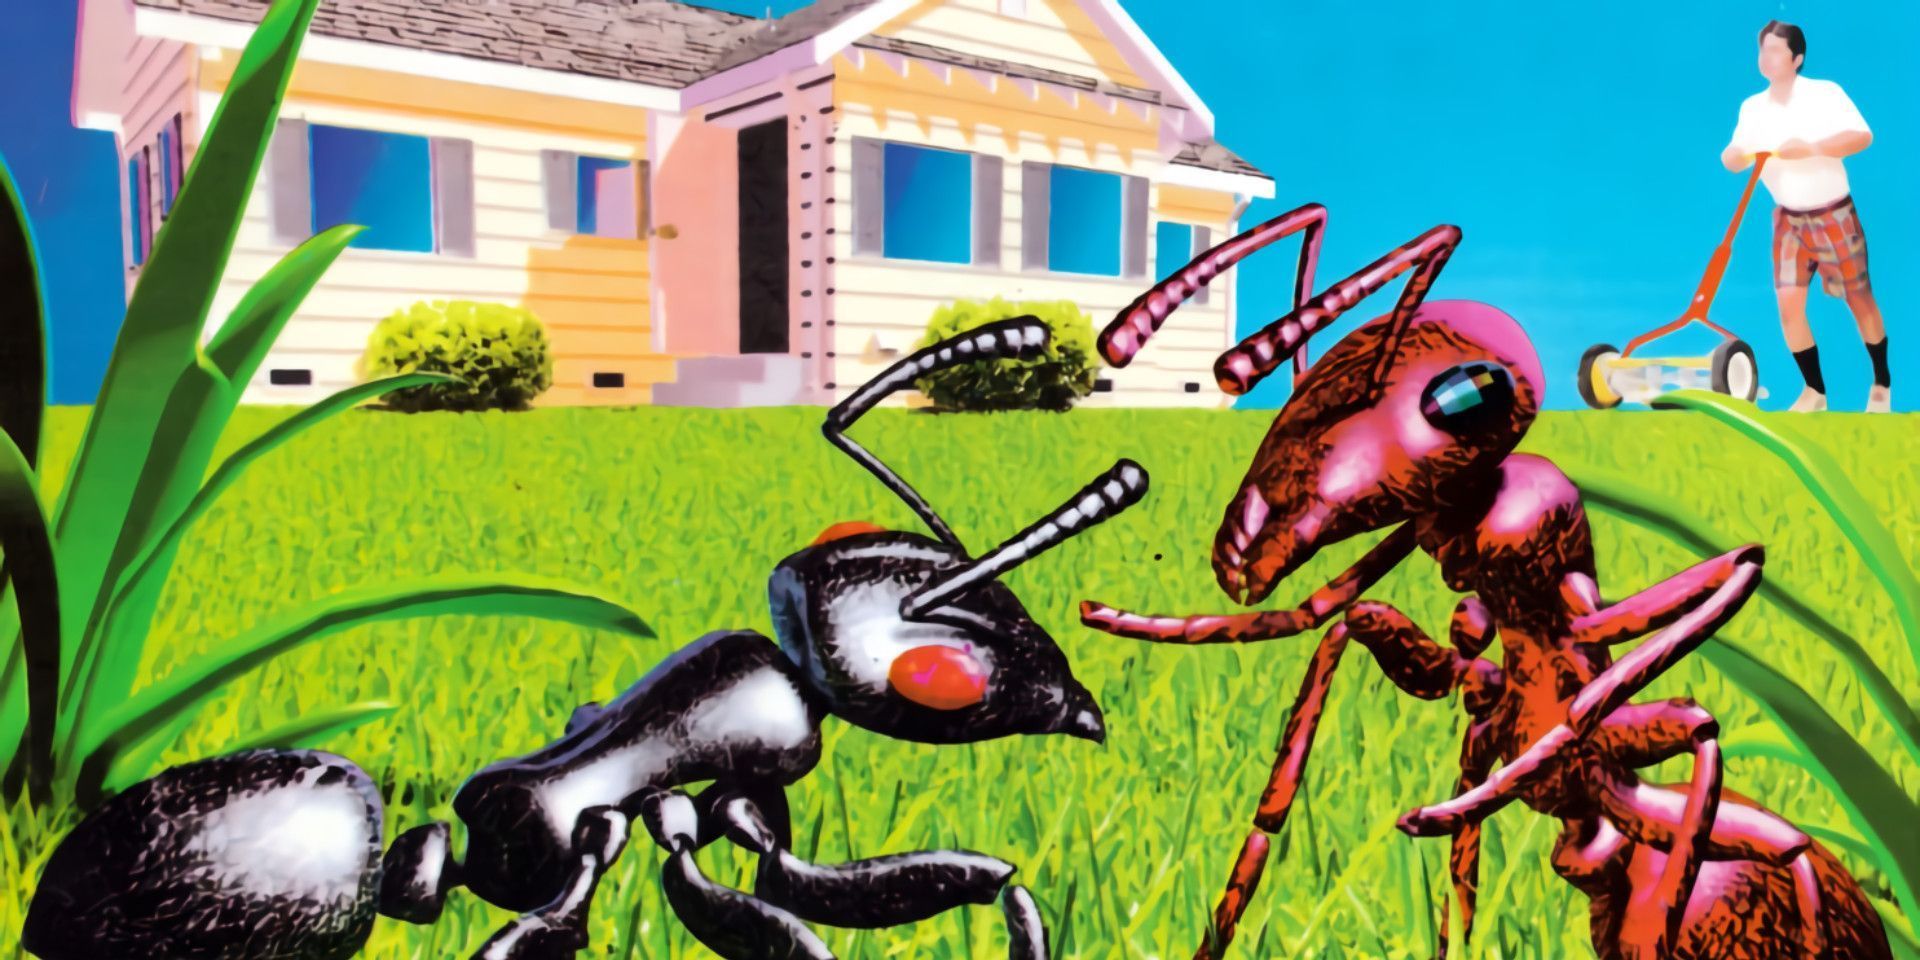 The cover art for SimAnt The Electronic Ant Colony